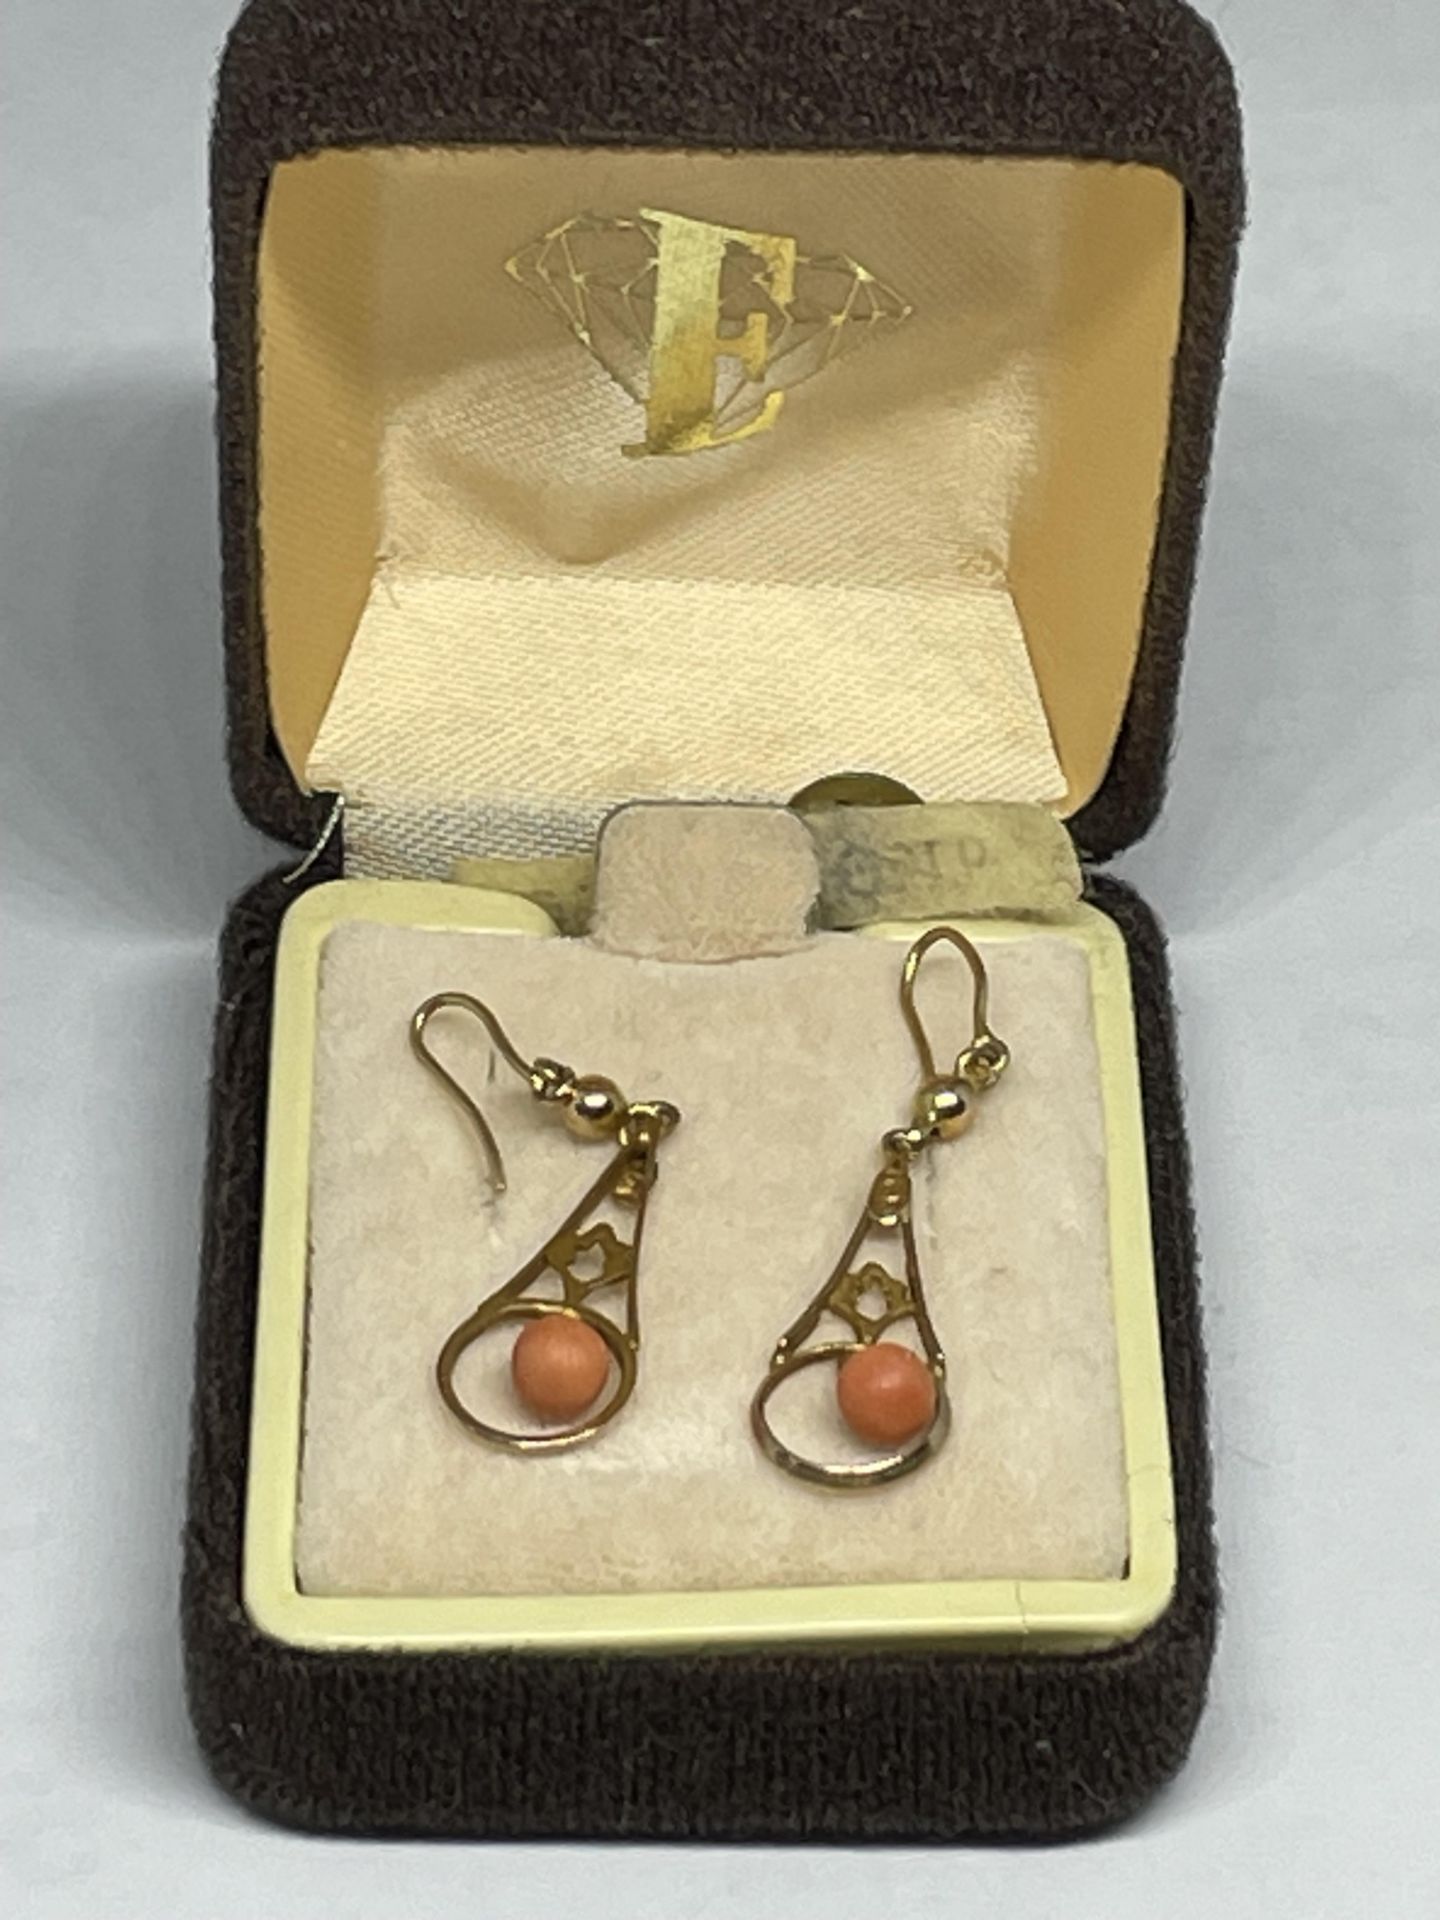 A PAIR OF 9 CARAT GOLD AND CORAL EARRINGS IN A PRESENTATION BOX - Image 3 of 3